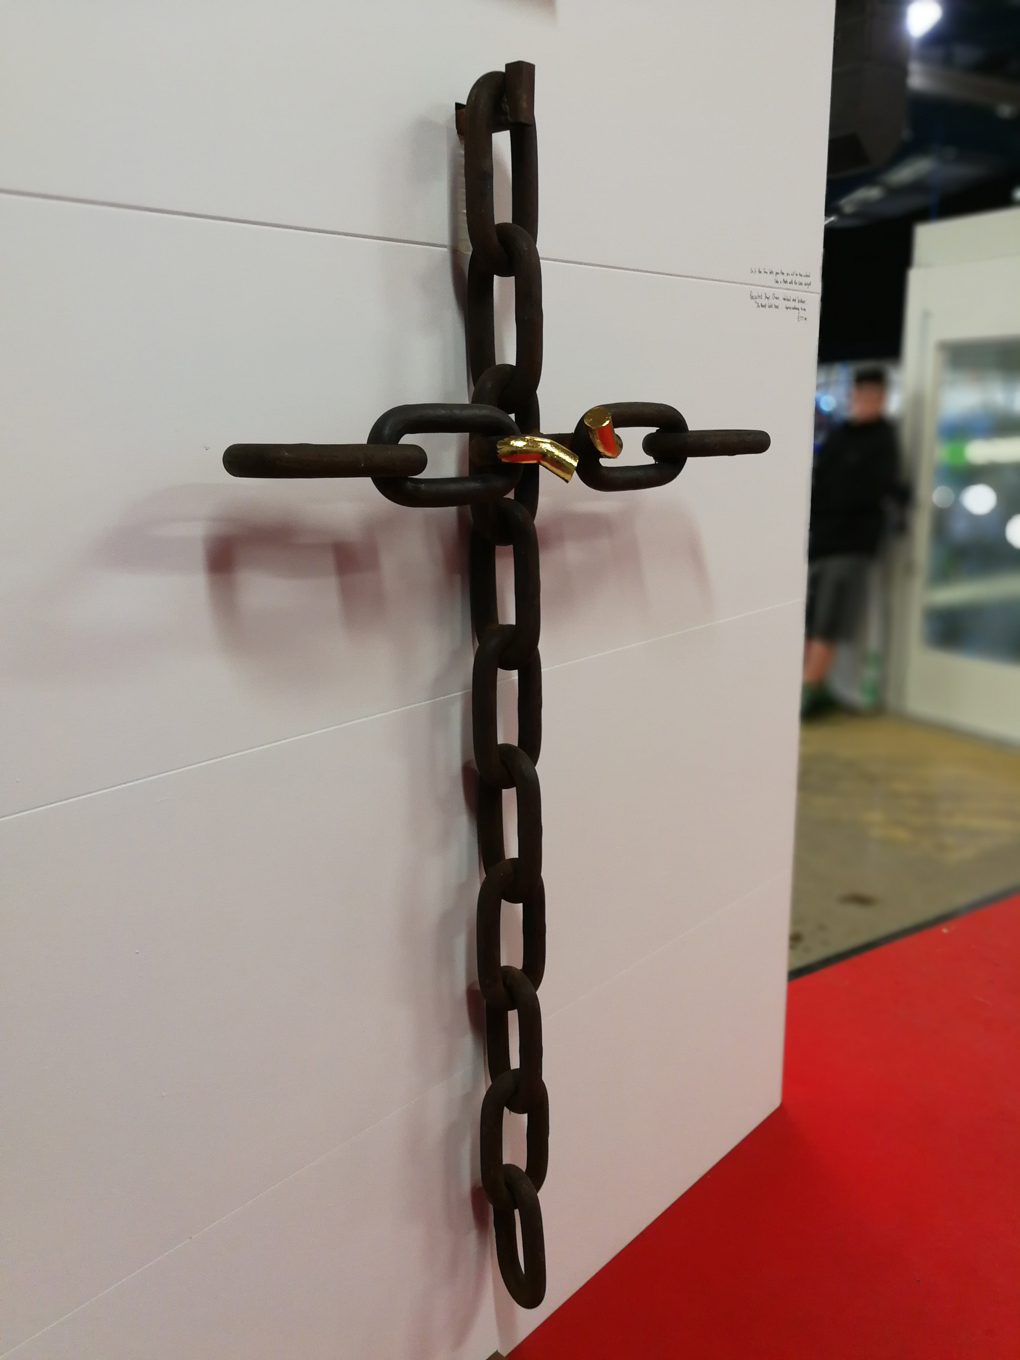 chain links forming a cross with the central one broken